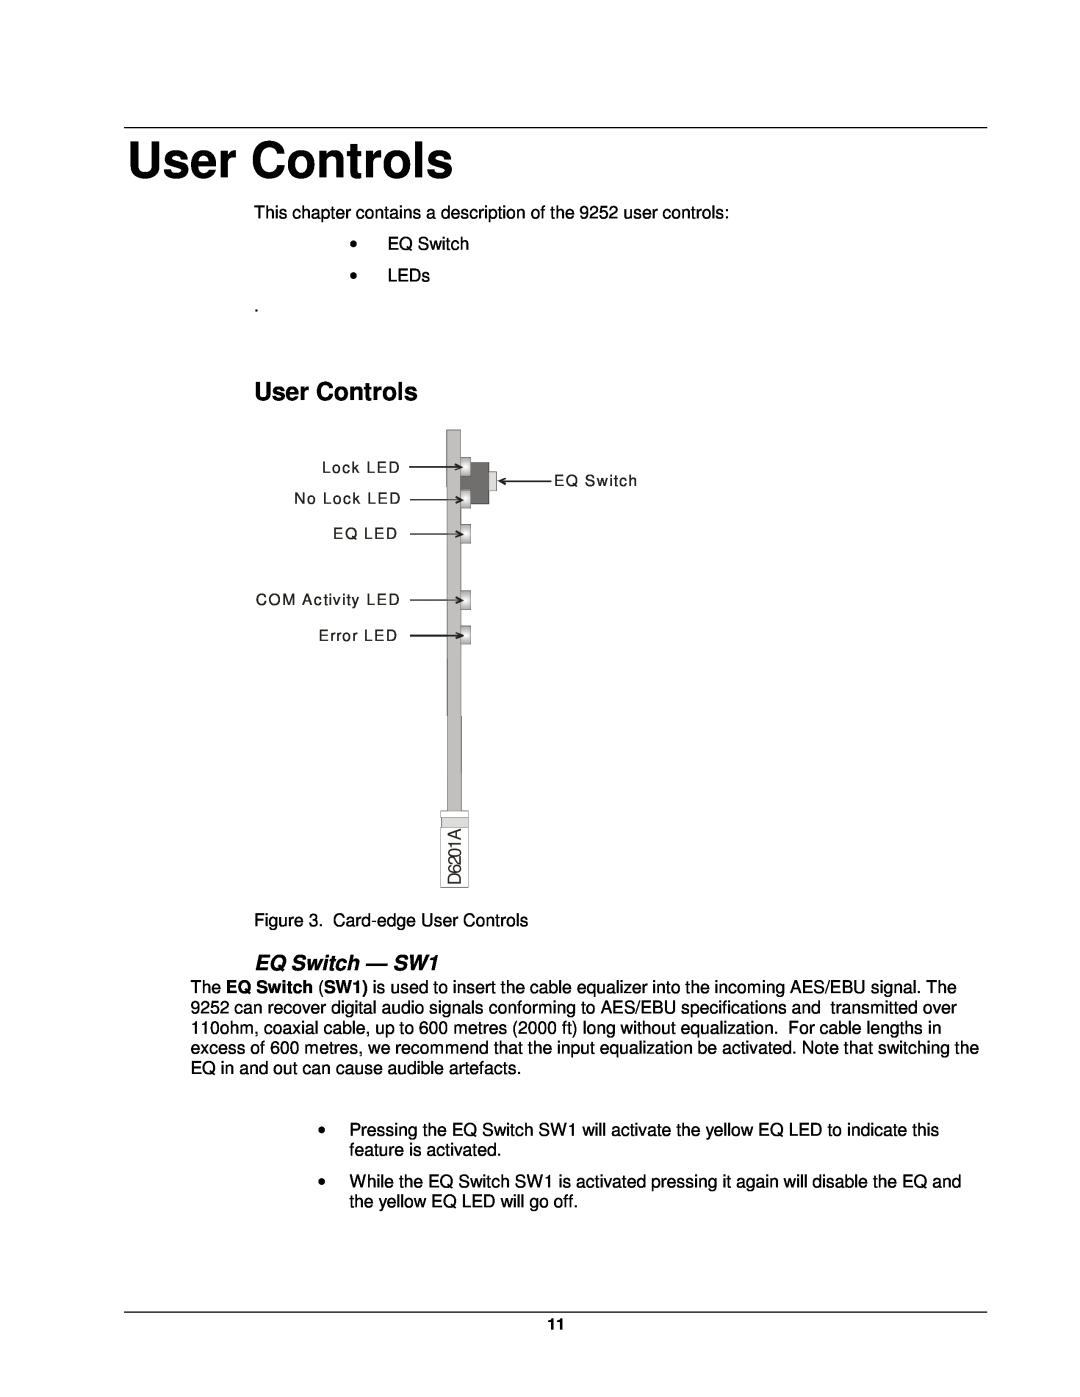 Cobalt Networks 9252 user manual User Controls, EQ Switch - SW1, D6201A 